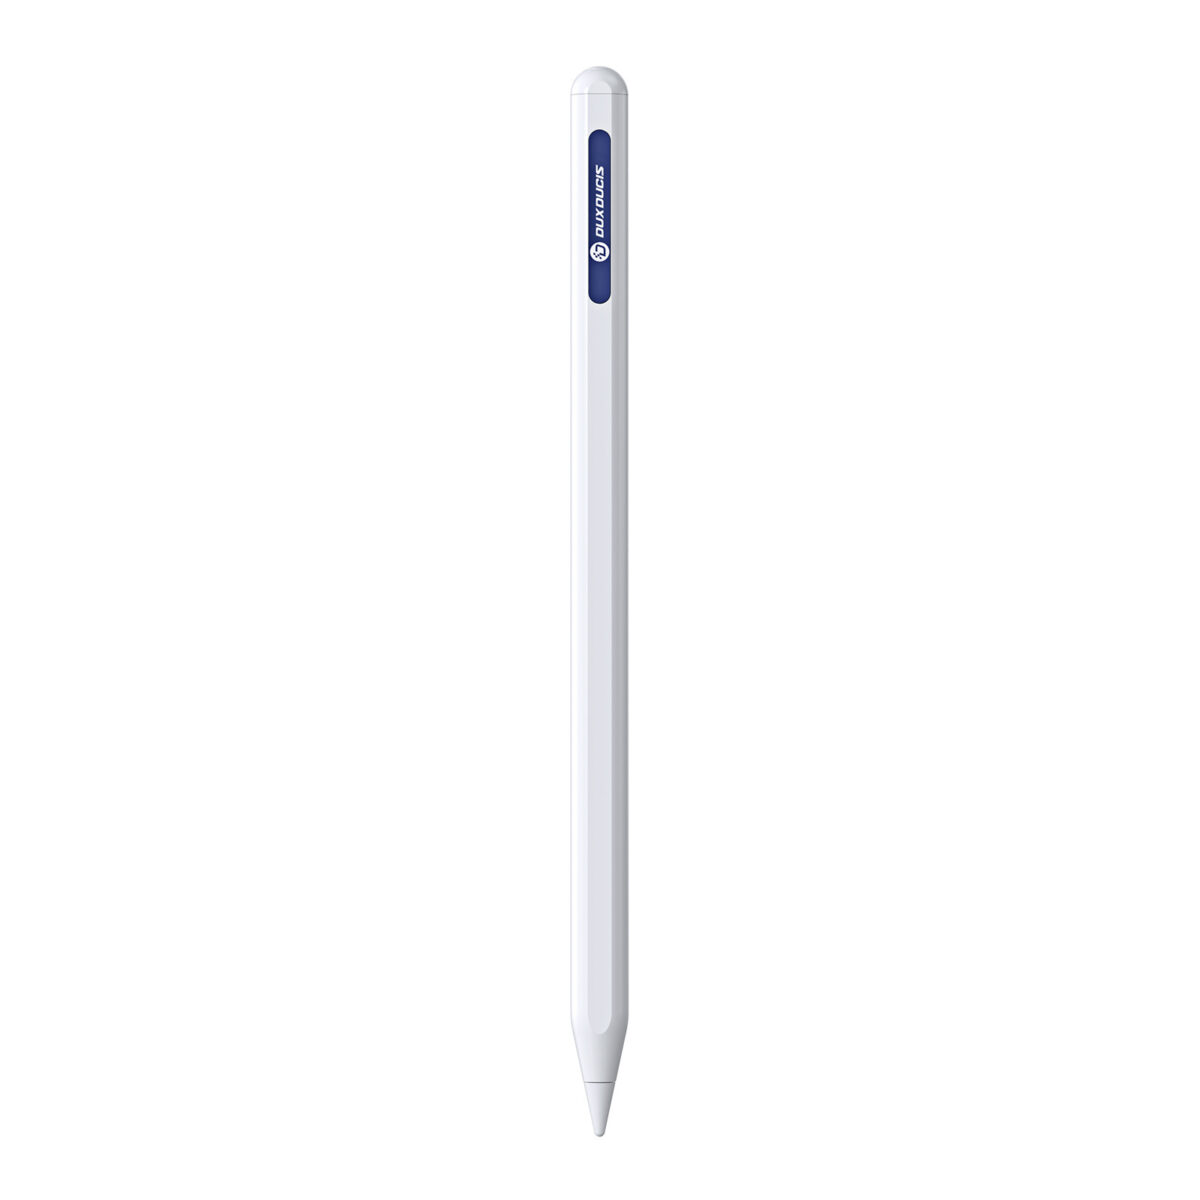 SP-03 White Stylus Pen with Wireless Charging